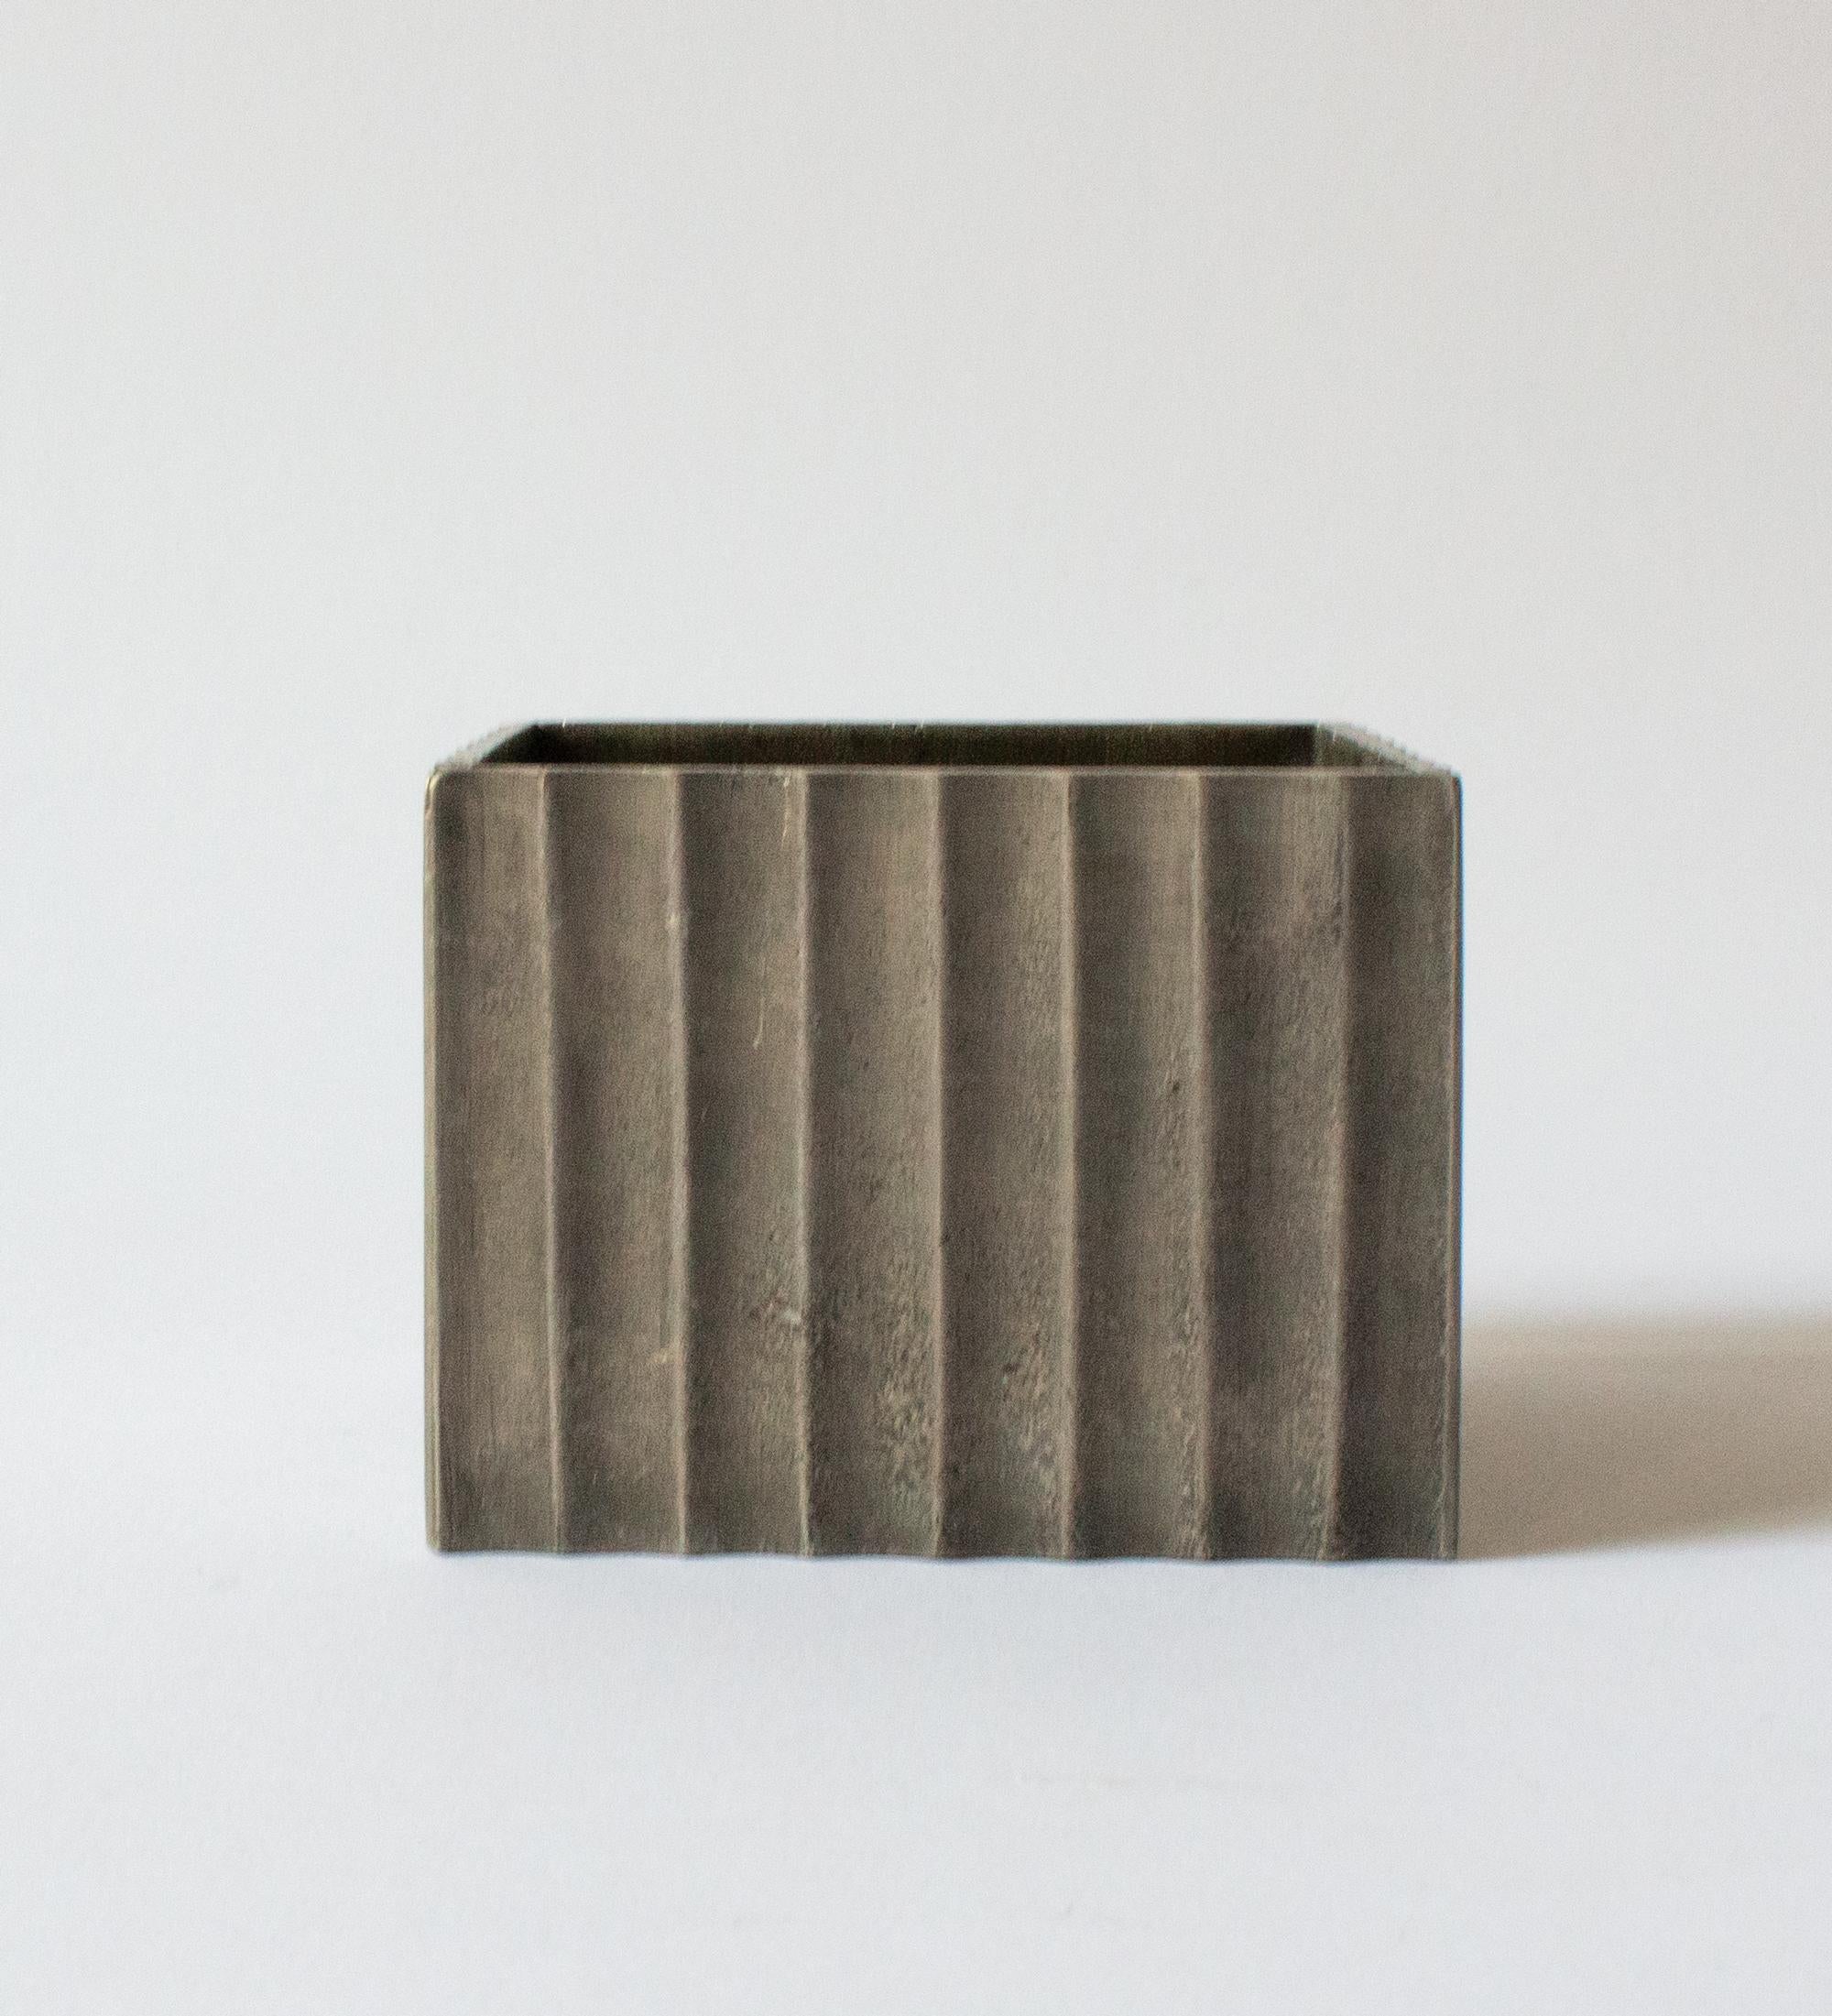 Simple, yet sophisticated, Swedish Grace pewter box by Ingvar Bossler for Gamleby Tenn, Västervik, Sweden.
The company Gamleby Tenn started in the late 1920s by Bossler. Even though all objects were designed by Ingvar Bossler himself, some objects